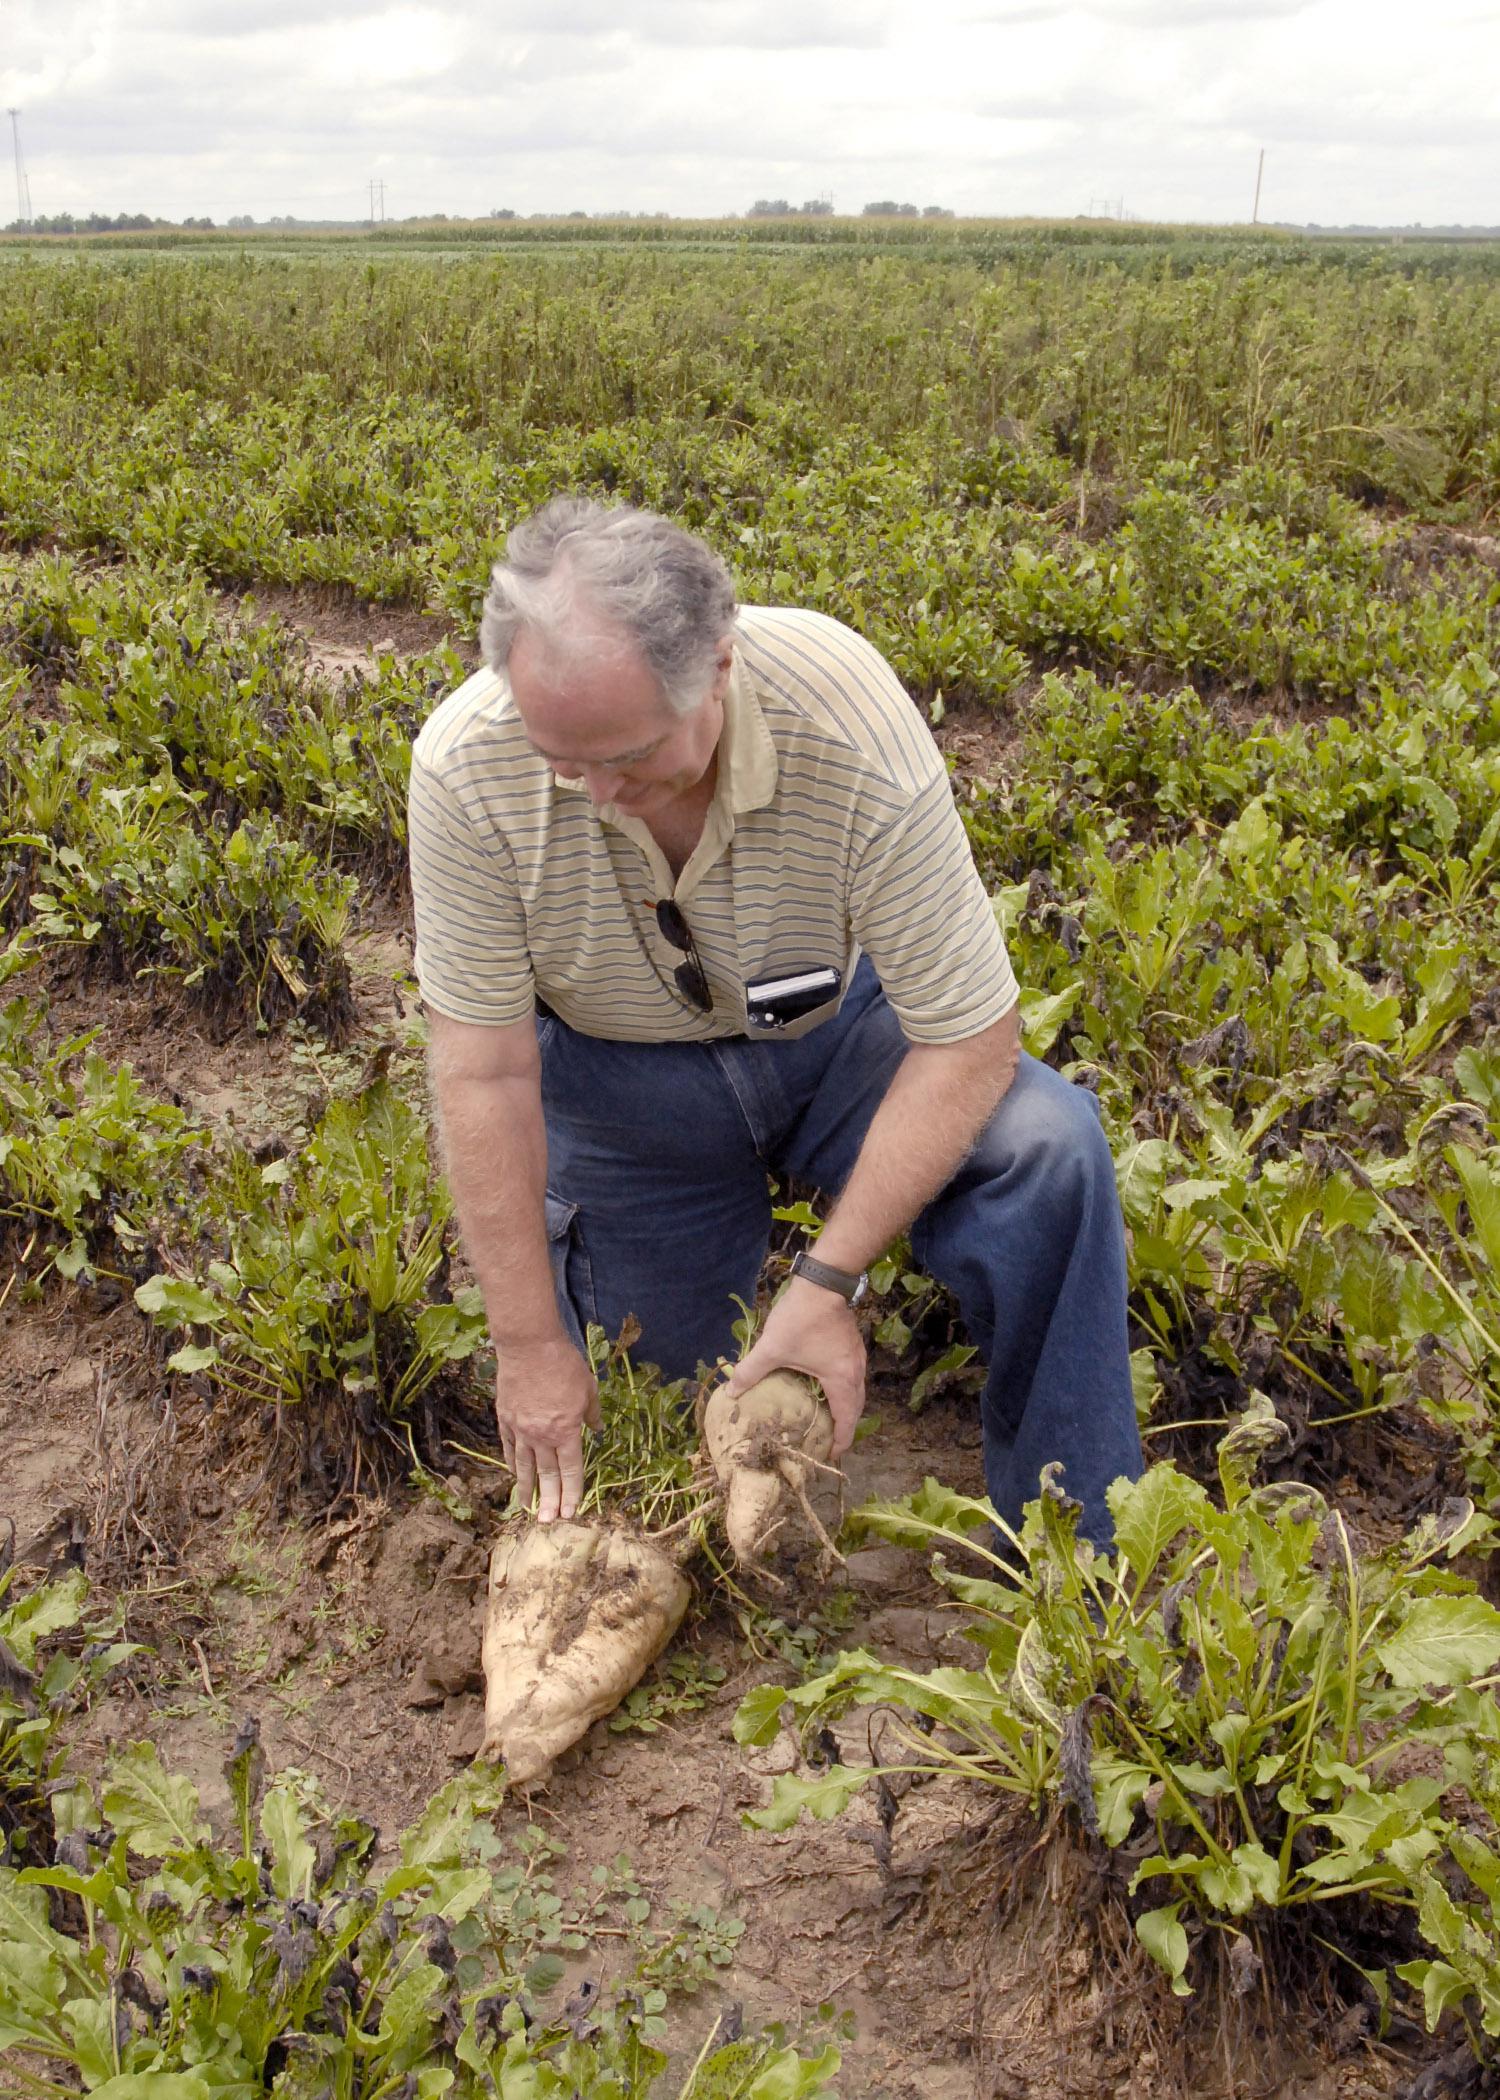 Wayne Ebelhar, a researcher with the Mississippi Agricultural and Forestry Experiment Station, compares on July 16, 2013, an energy beet planted at the Mississippi State University Delta Research and Extension Center last September with one planted in March to see the size differences. Researchers are establishing the growth and profit potential for this bioenergy source most commonly grown across the Northern Plains. (Photo by MSU Ag Communications/Linda Breazeale)